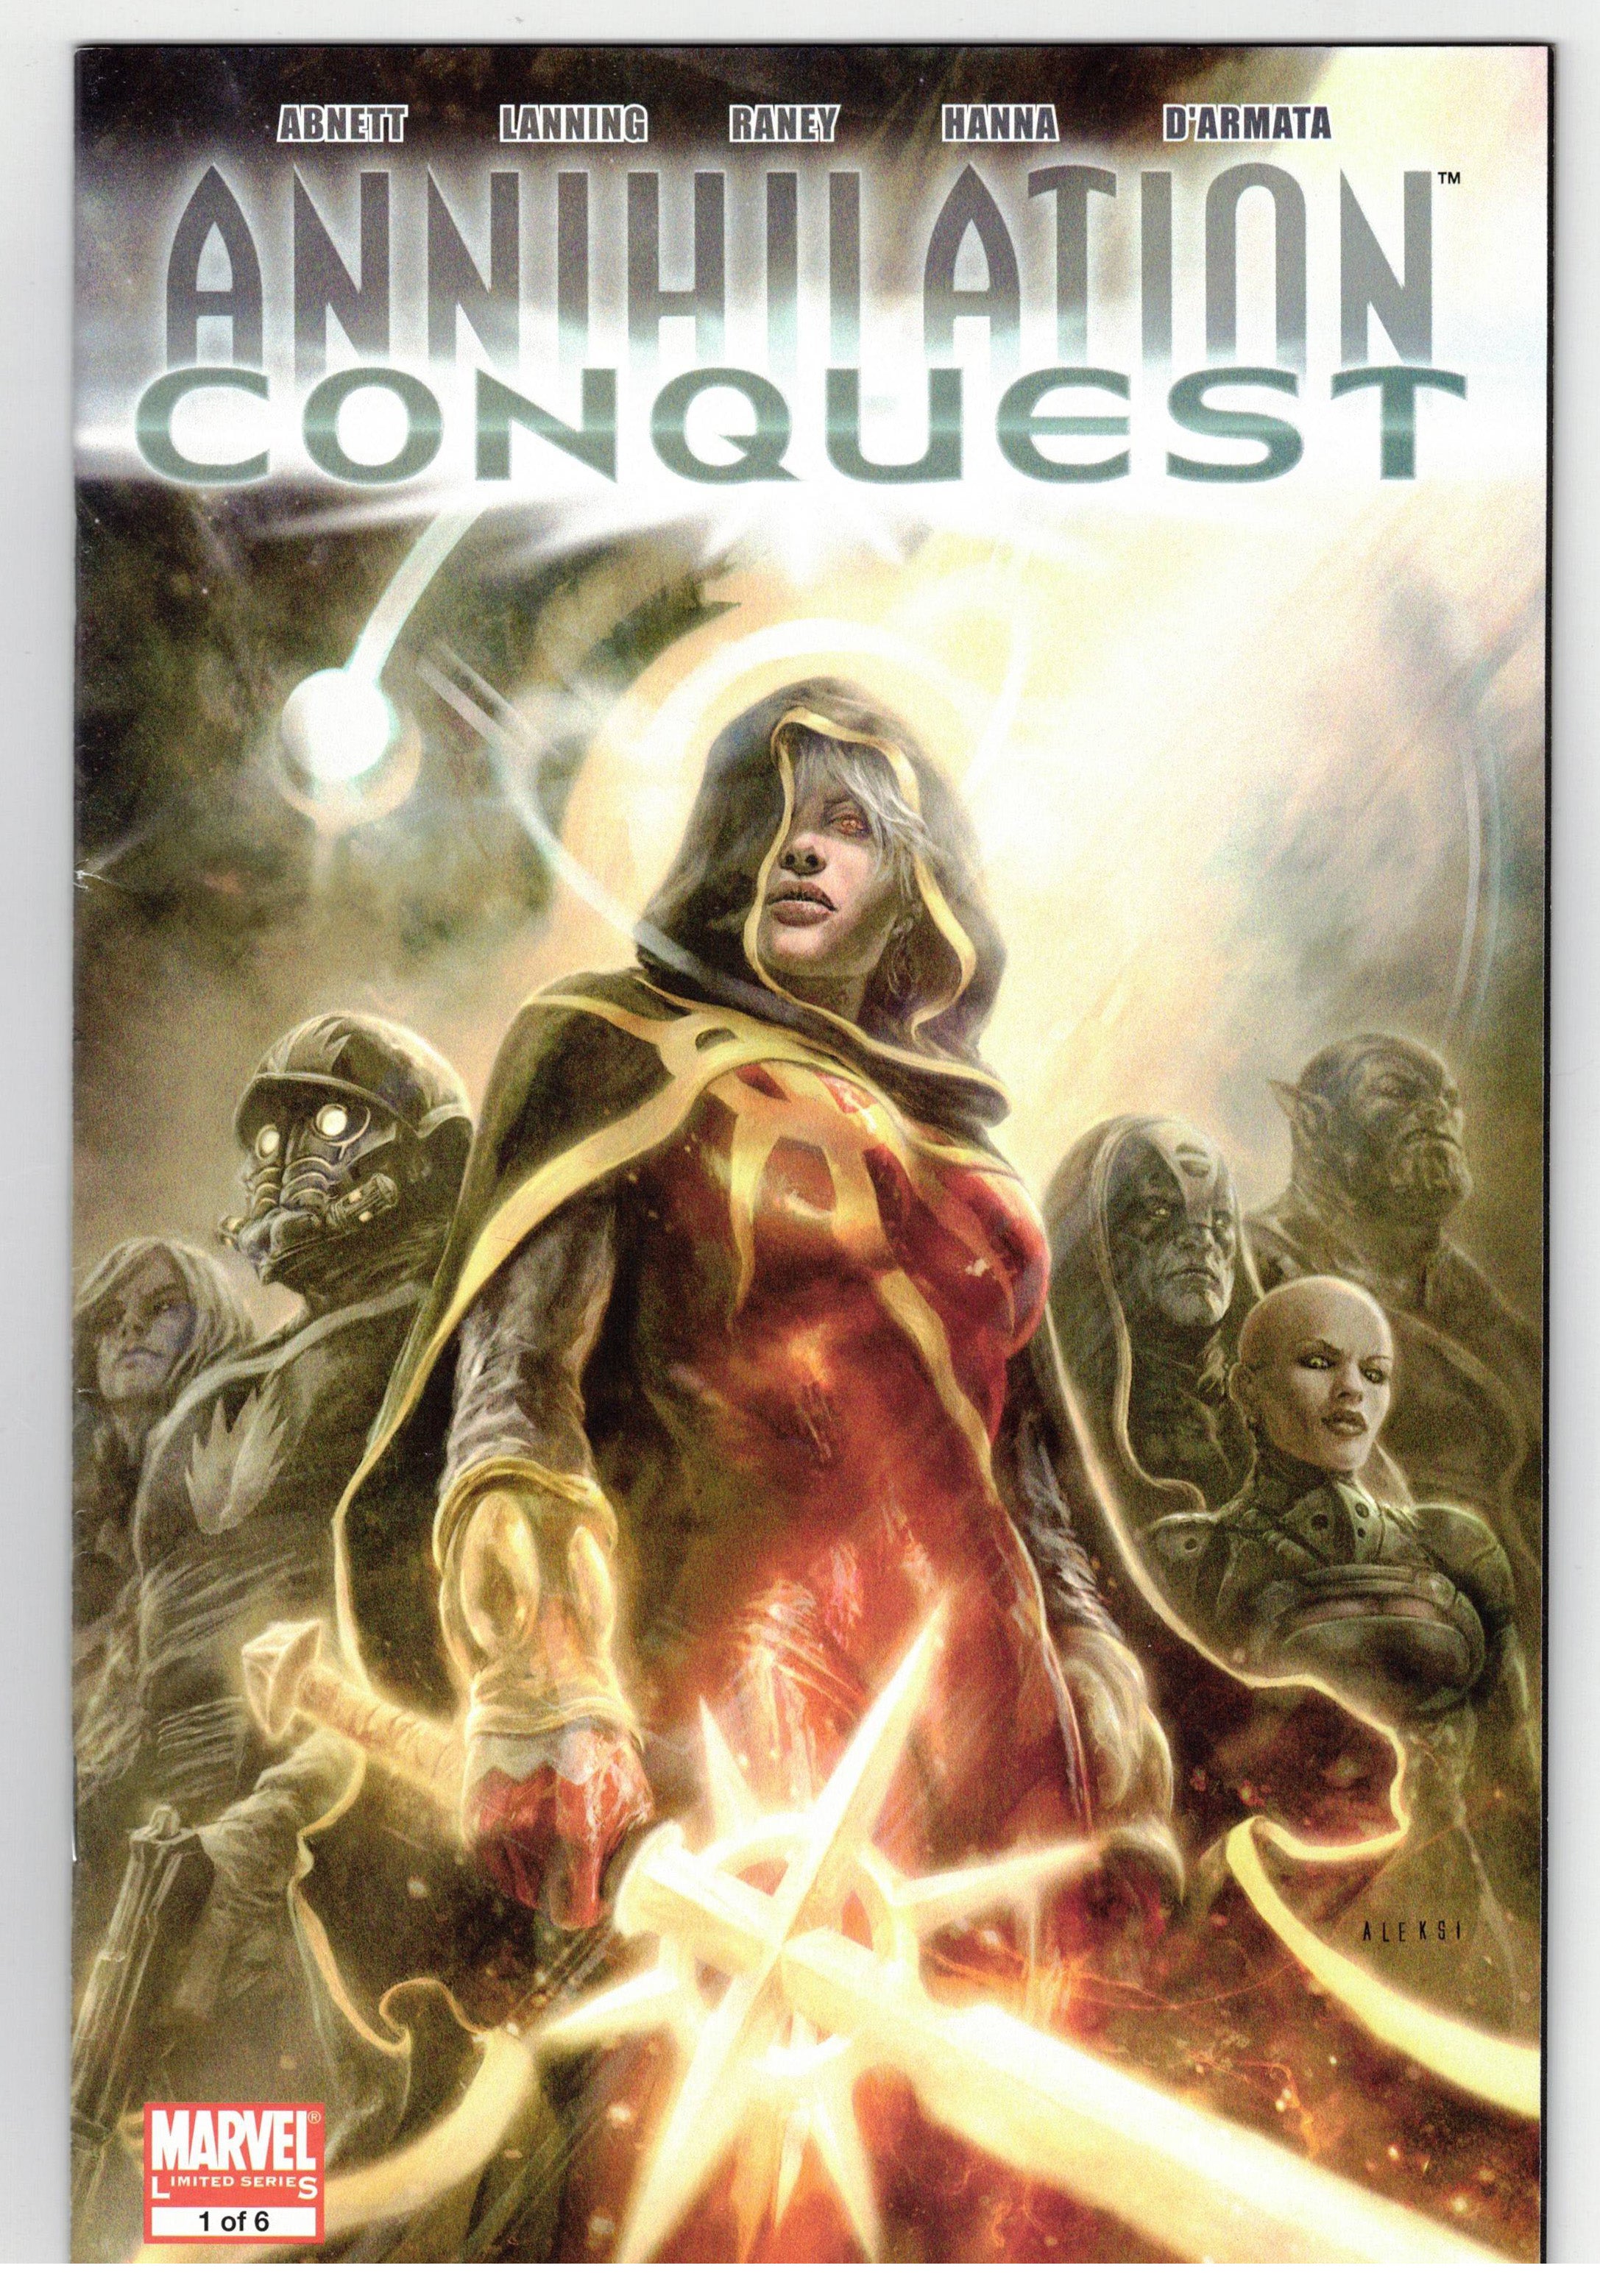 Photo of Annihilation: Conquest (2008) Issue 1 - Very Fine + Comic sold by Stronghold Collectibles